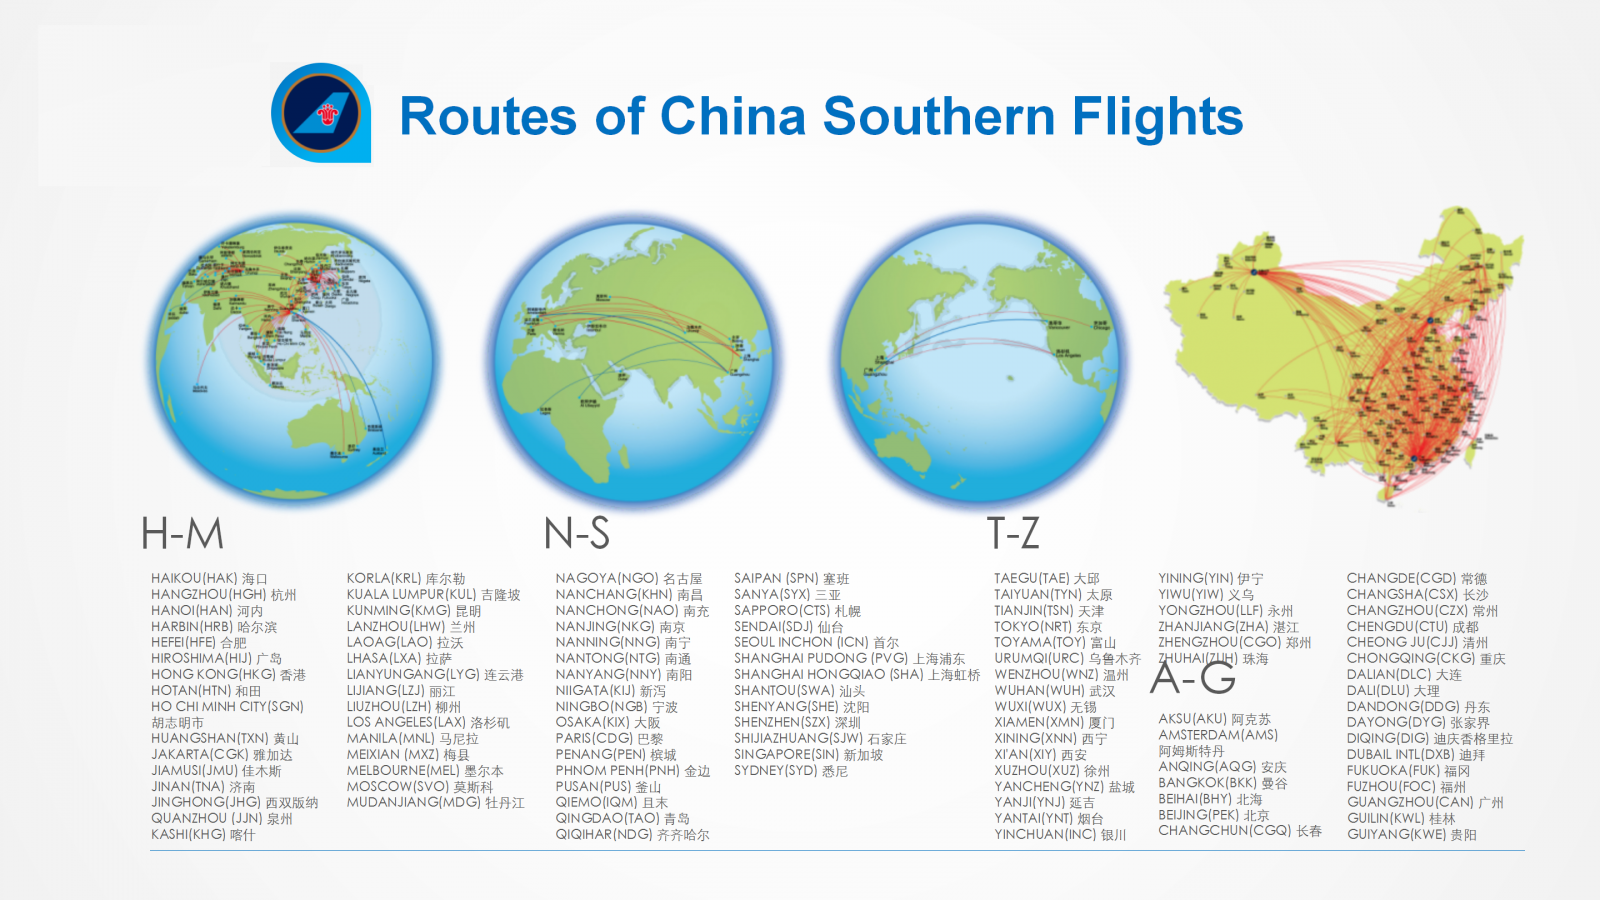 China Southern Airlines inflight magazine